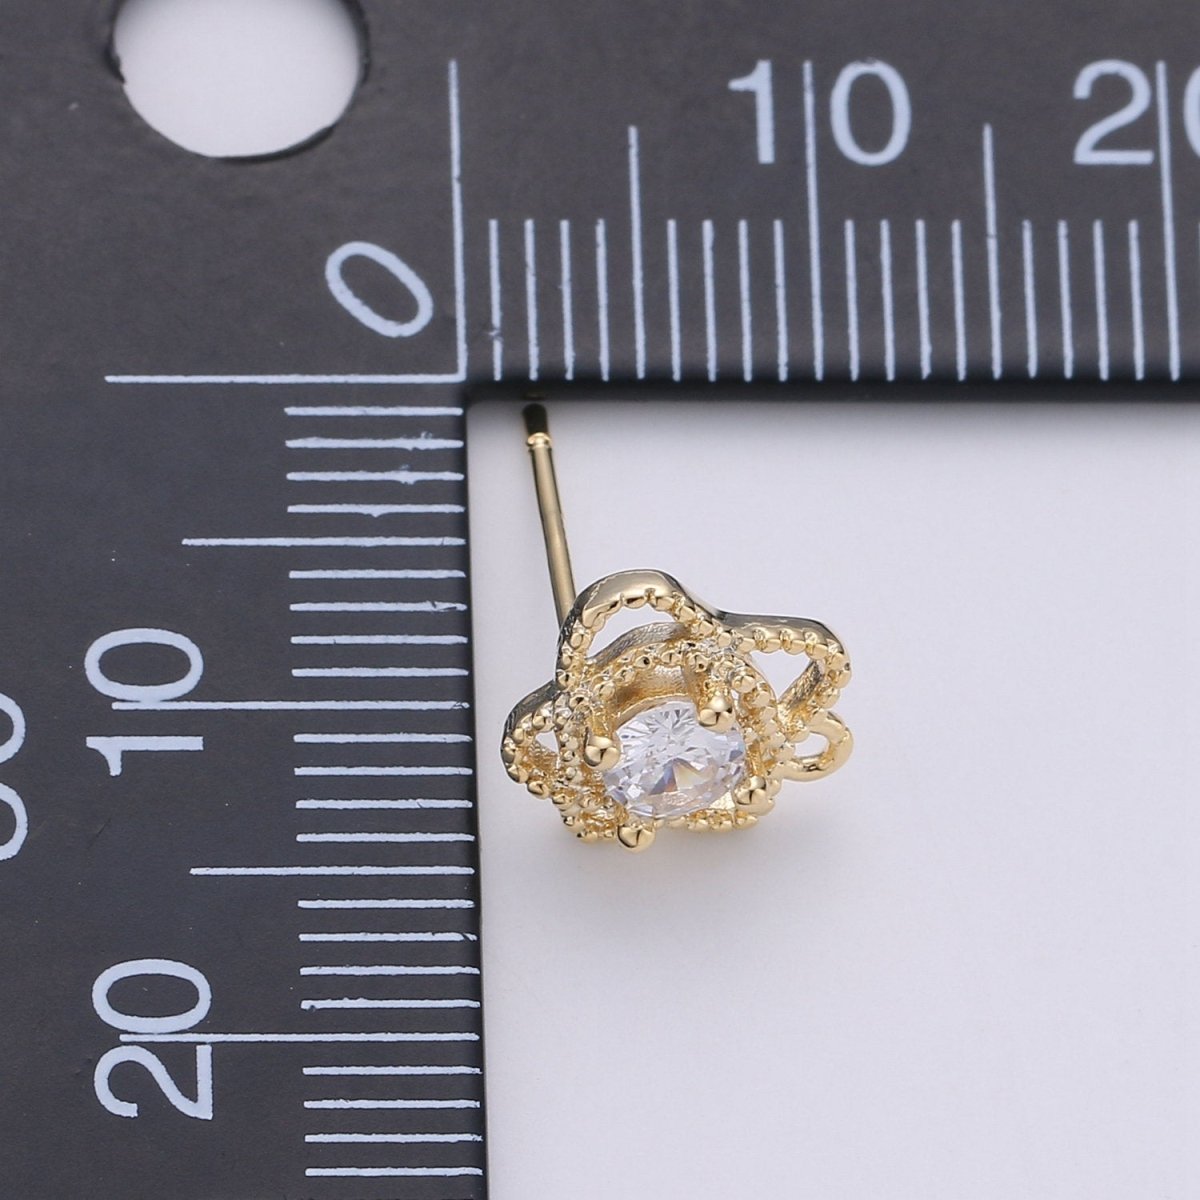 Flower Stud Earring Charm • 24k Gold Filled• Micro Pave Floral Stud • Jewelry Making Supplies • Open Link for Jewelry Making Supply K-410 PAIR - DLUXCA